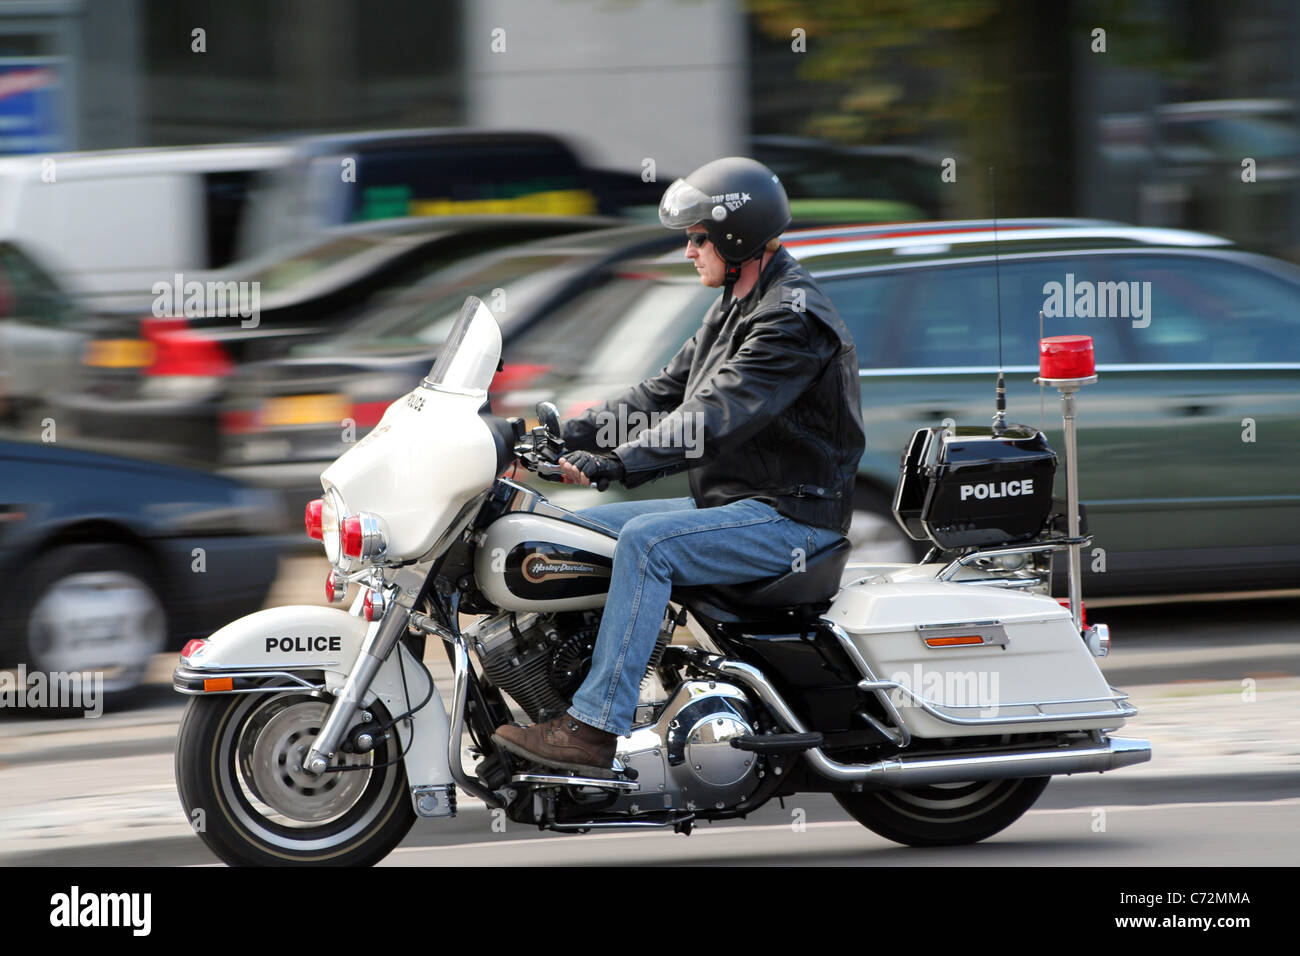 Police Bike High Resolution Stock Photography and Images - Alamy